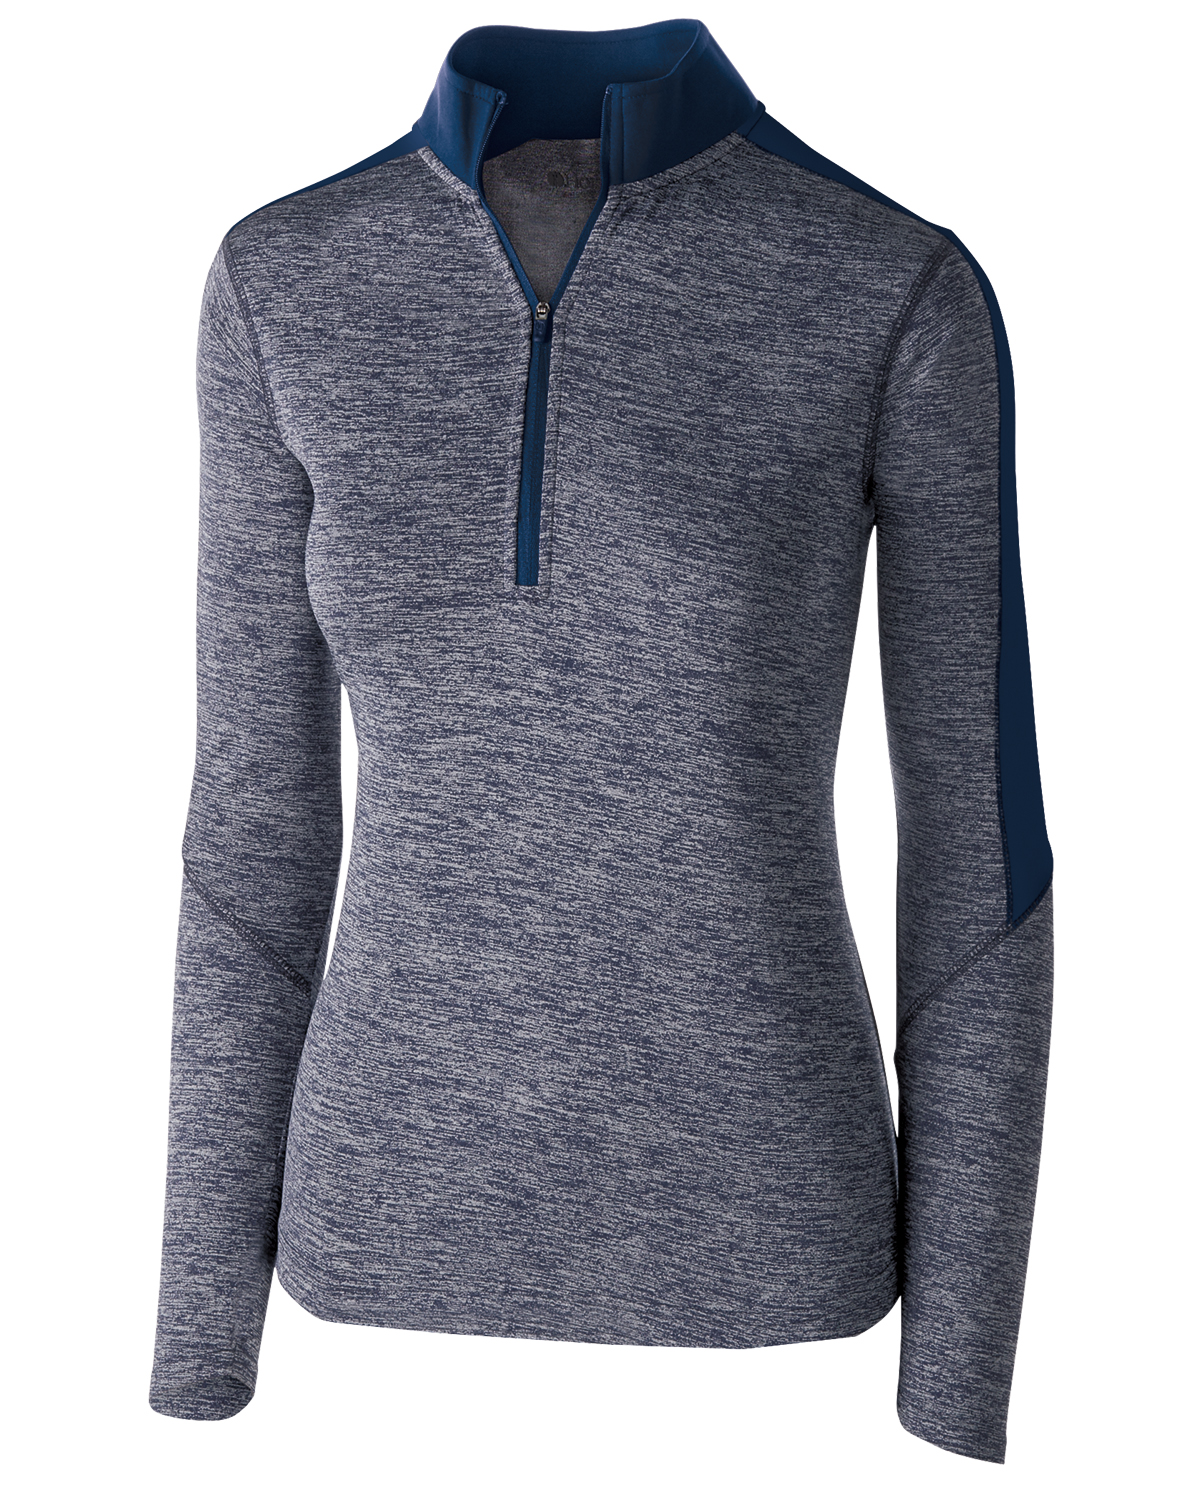 Ladies'' Dry-Excel Electrify Performance Polyester Knit Half-Zip ...